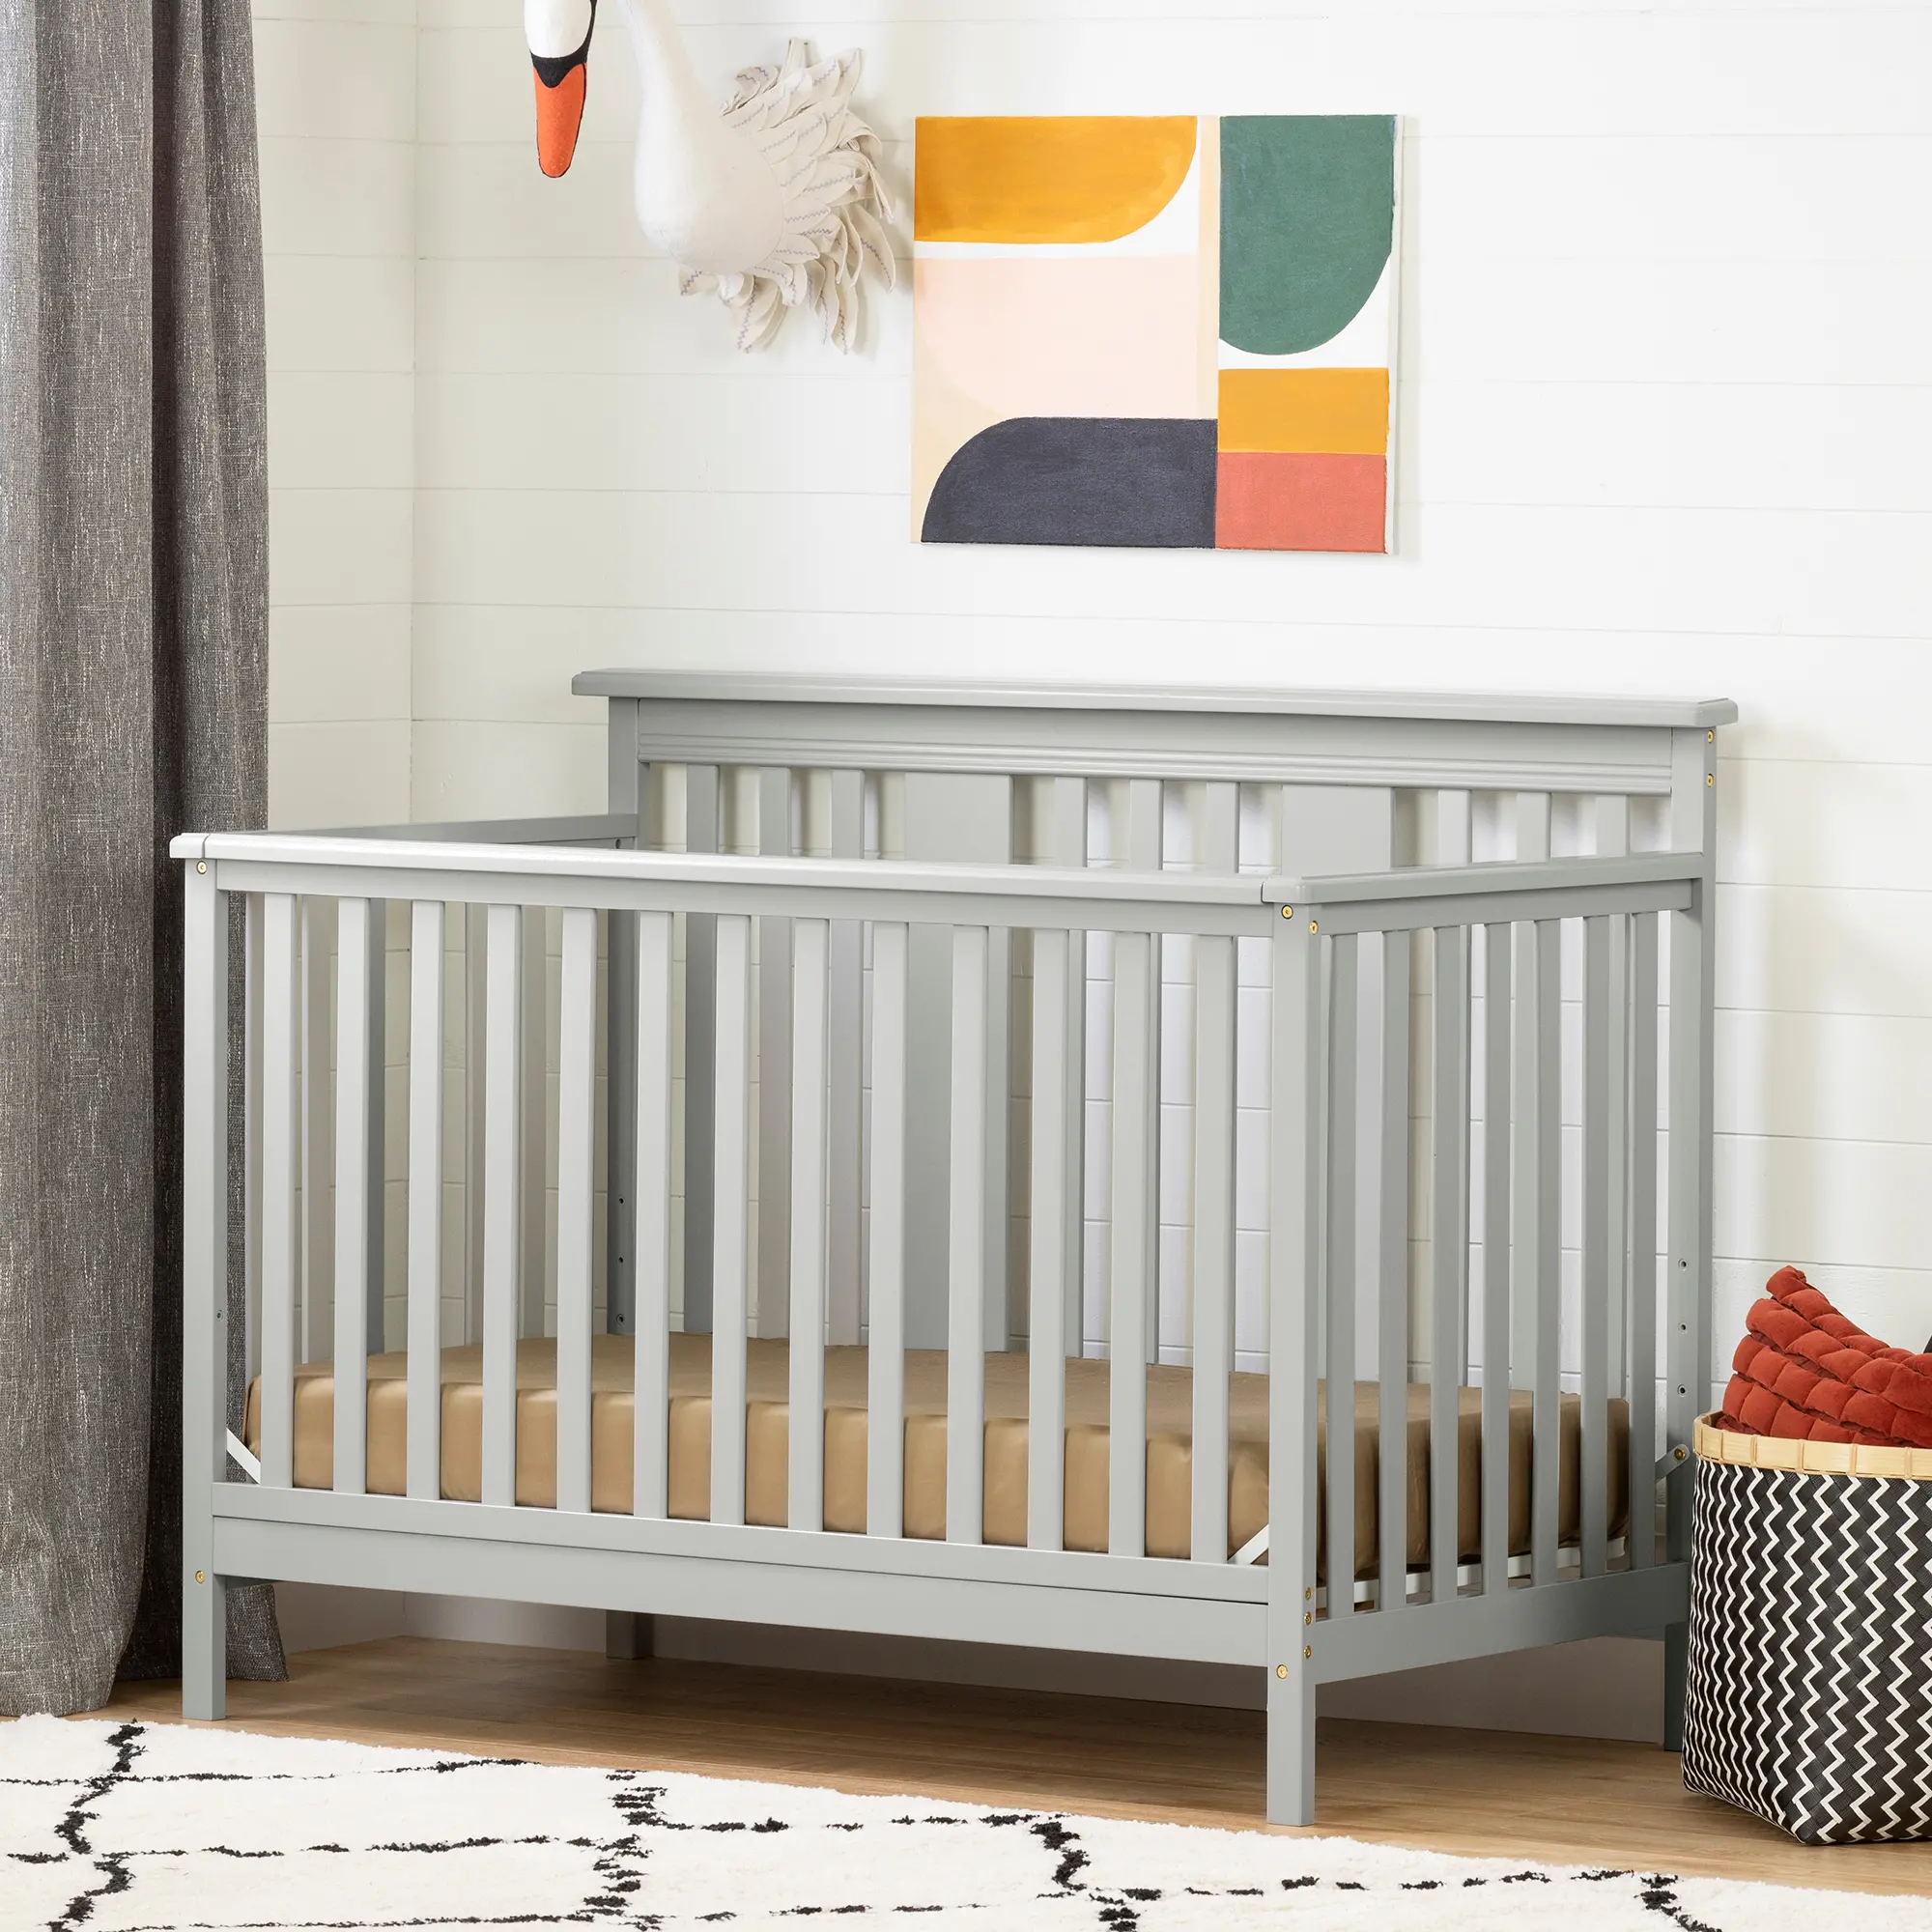 11851 Cotton Candy Gray Crib with Toddler Rail - South S sku 11851